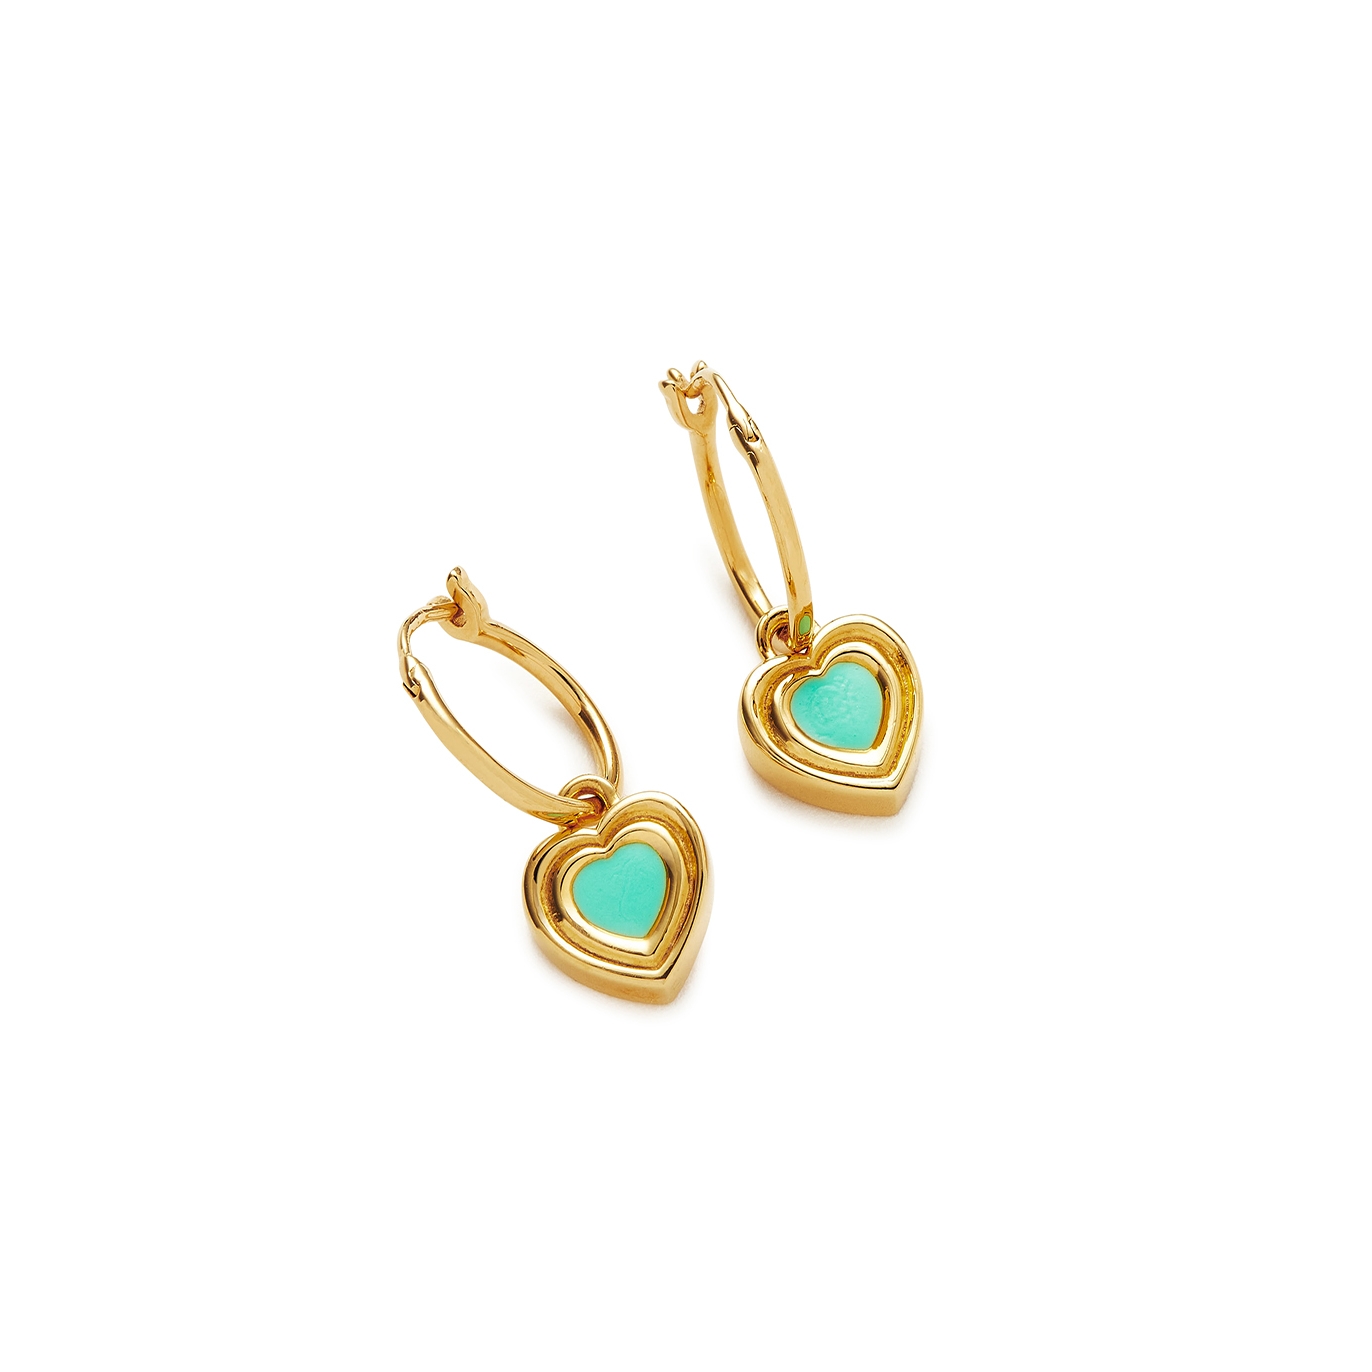 Missoma Good Vibes 18kt Gold-plated Hoop Earrings - Turquoise - One Size